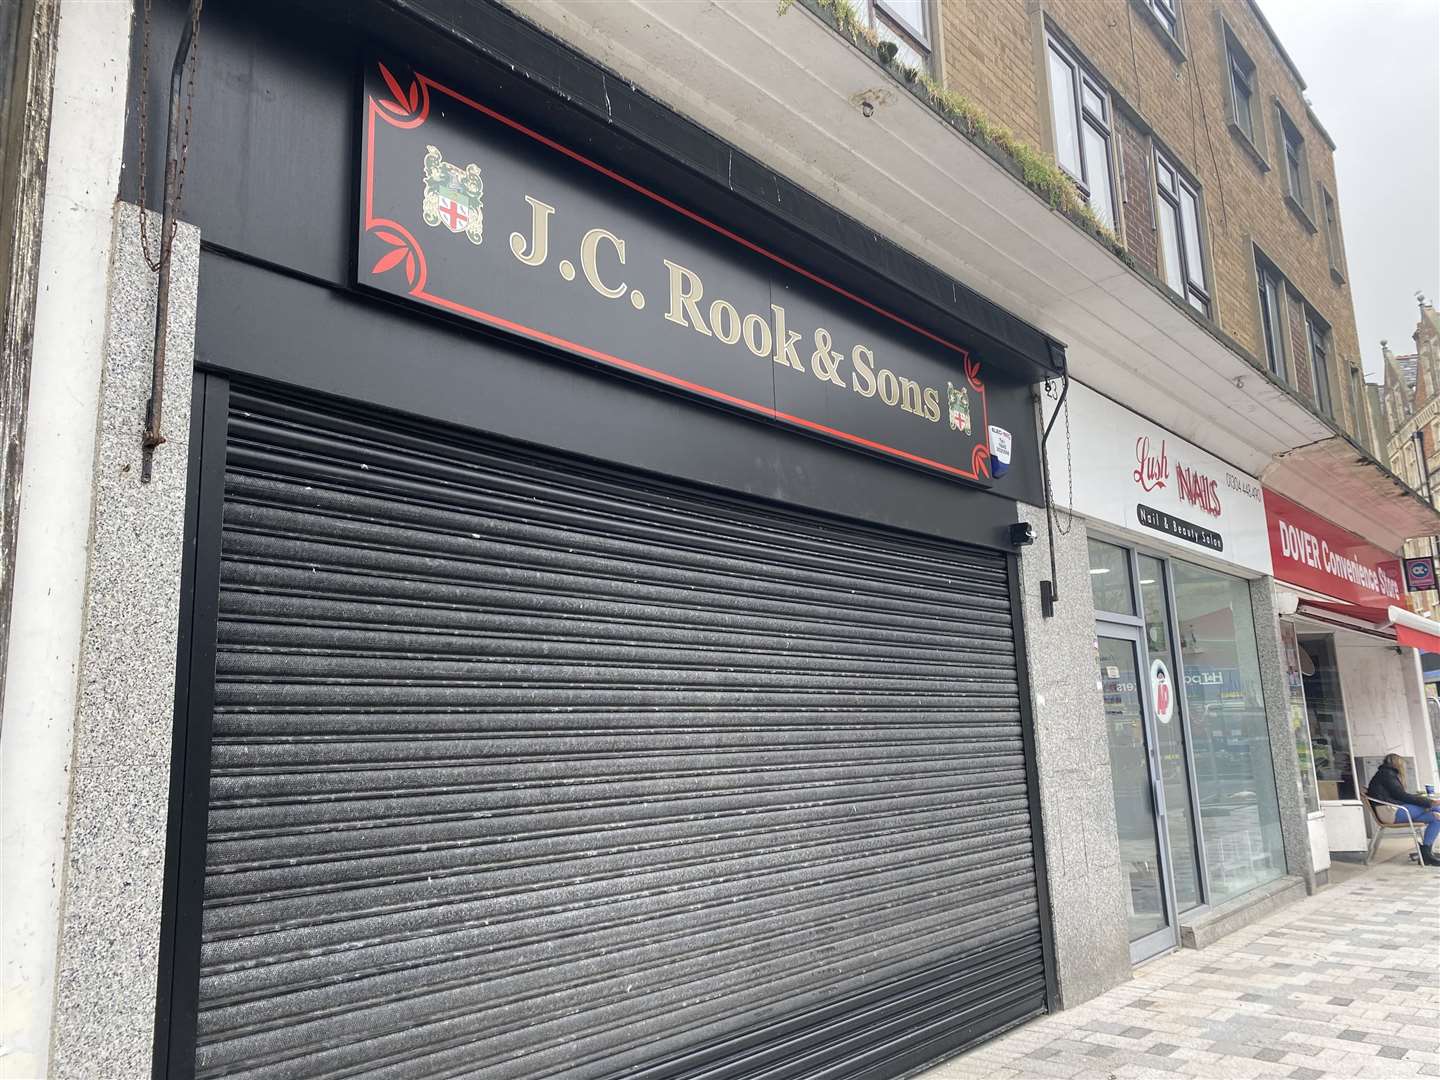 JC Rook in Dover's Market Square is now shut